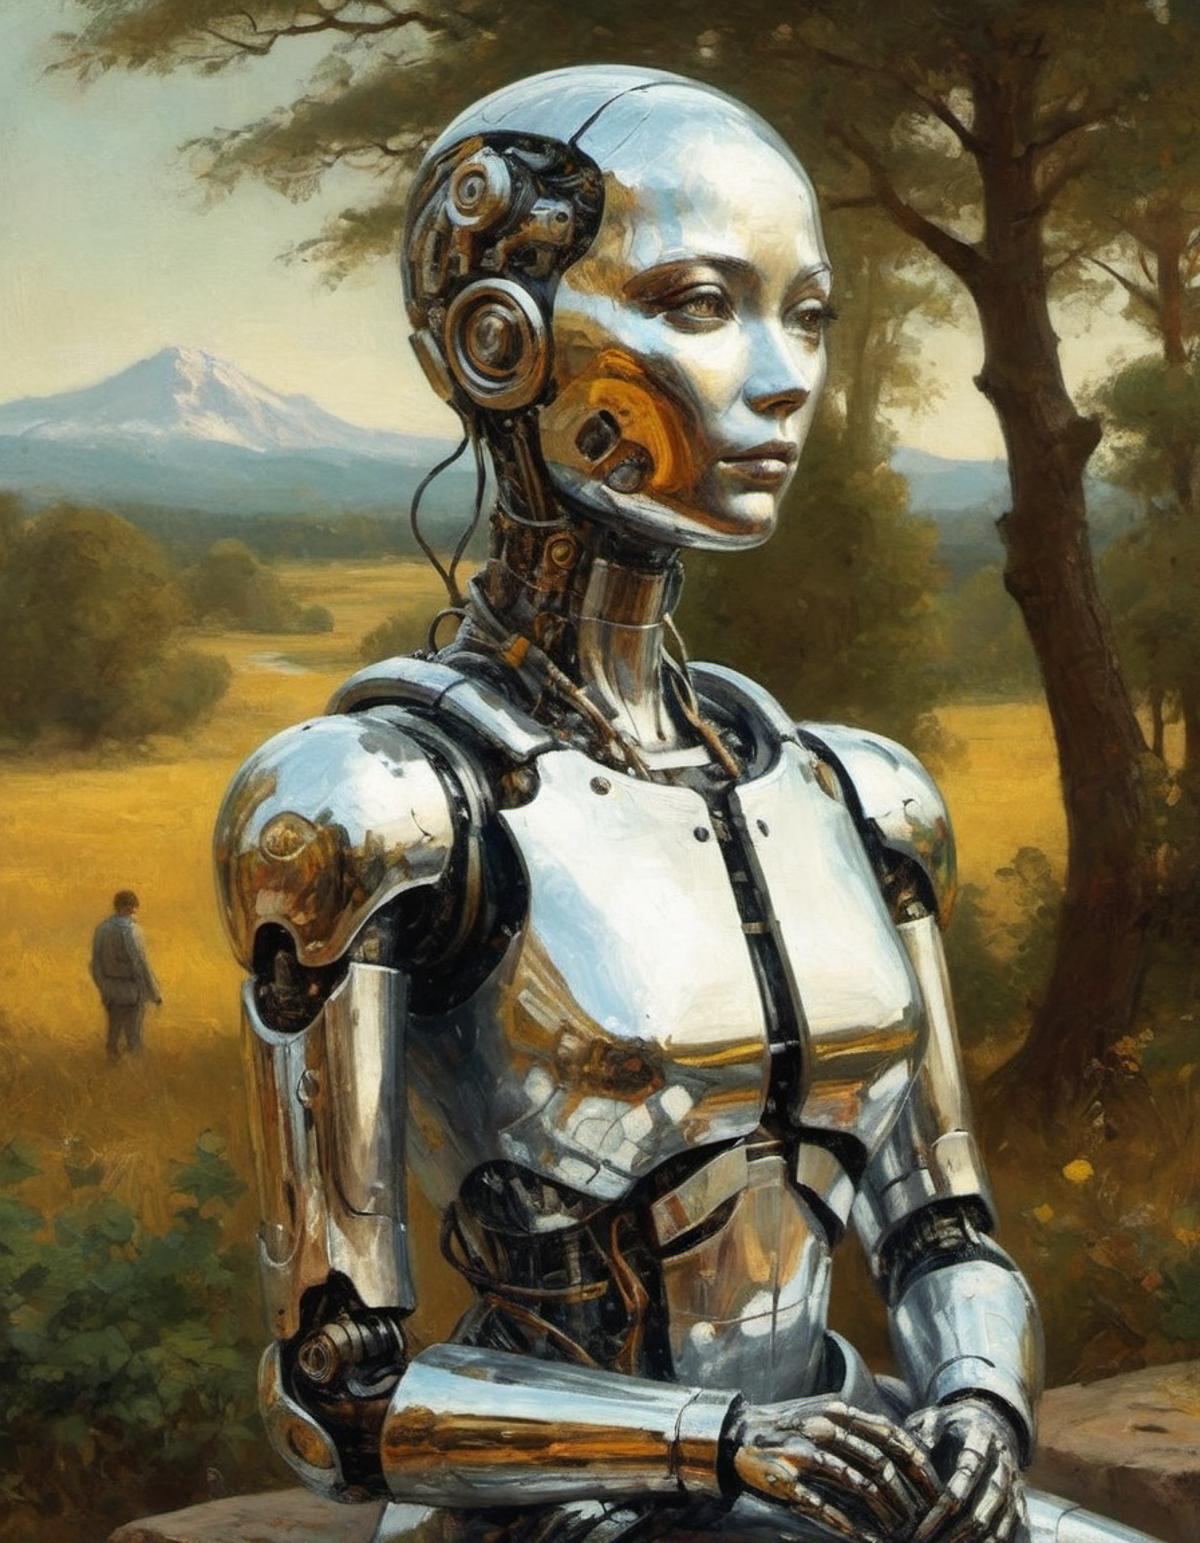 A robotic woman in a metal dress standing in a field with mountains in the background.